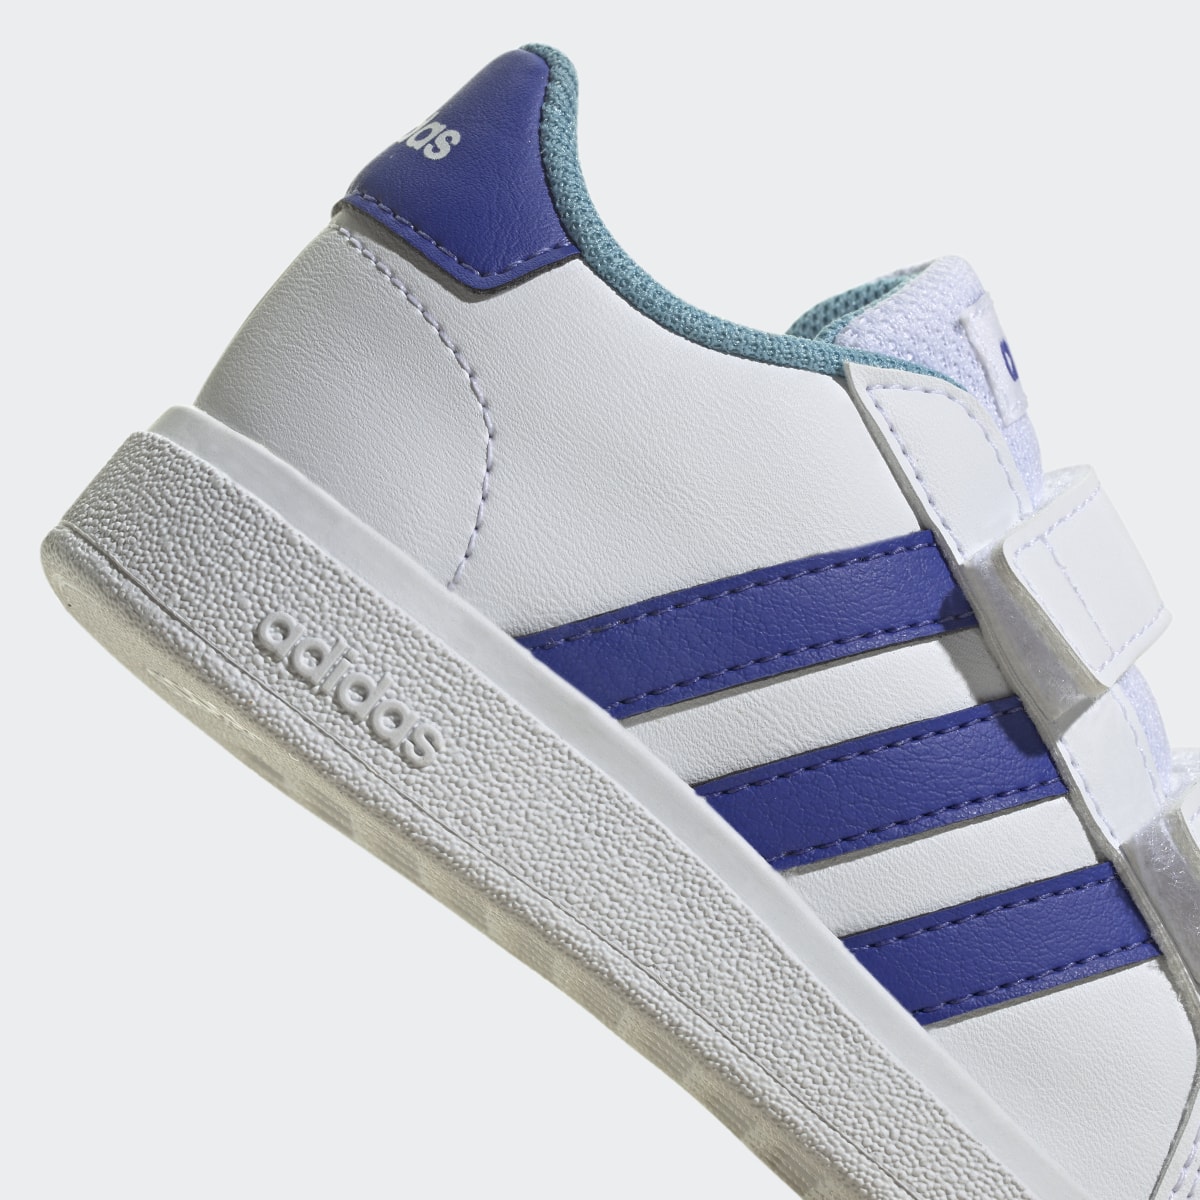 Adidas Grand Court Lifestyle Hook and Loop Schuh. 9